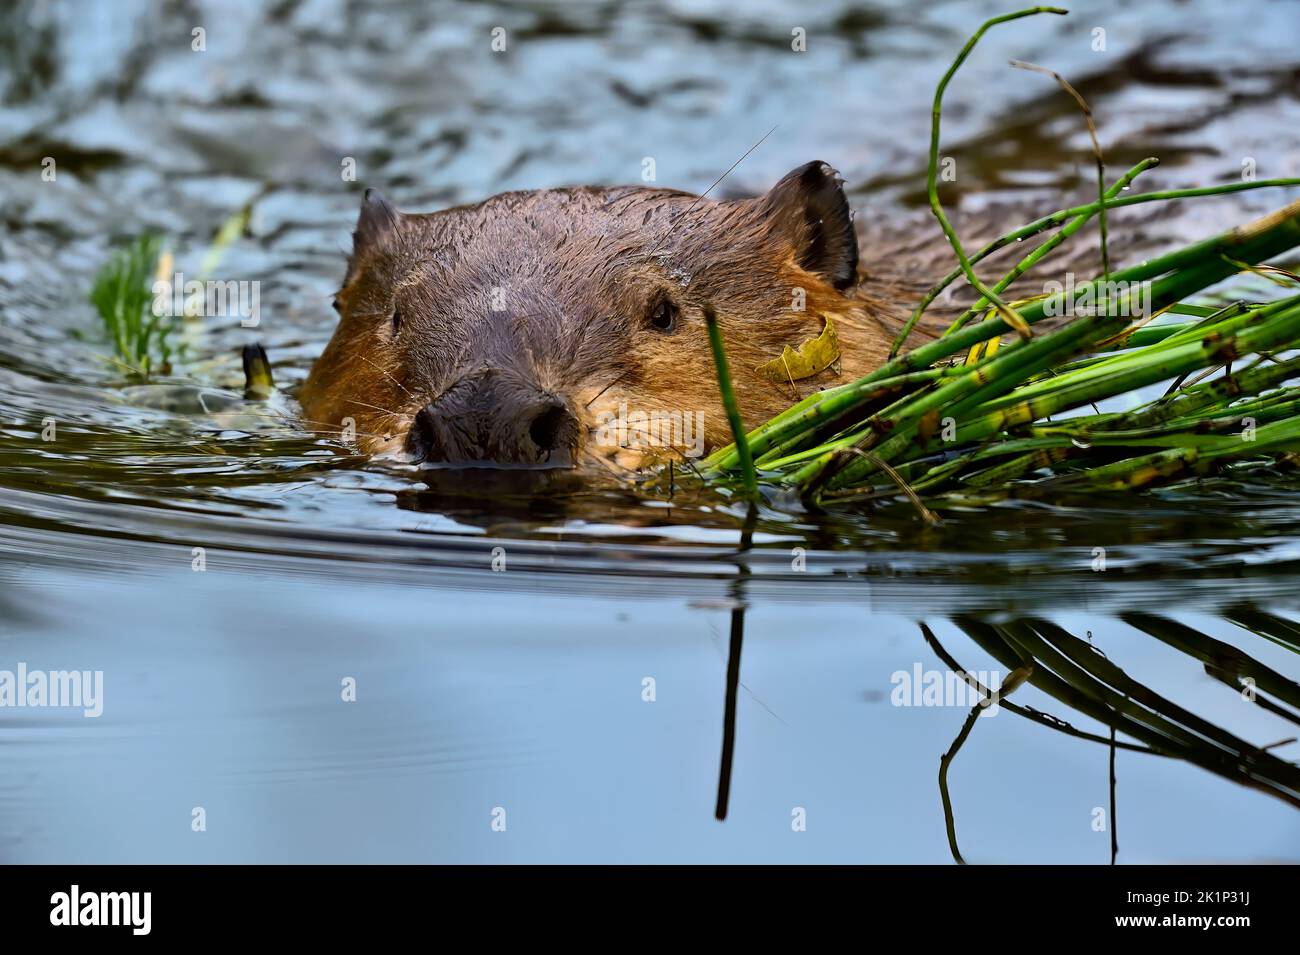 An adult beaver 'Castor canadensis', swimming with a load of green marsh grass Stock Photo